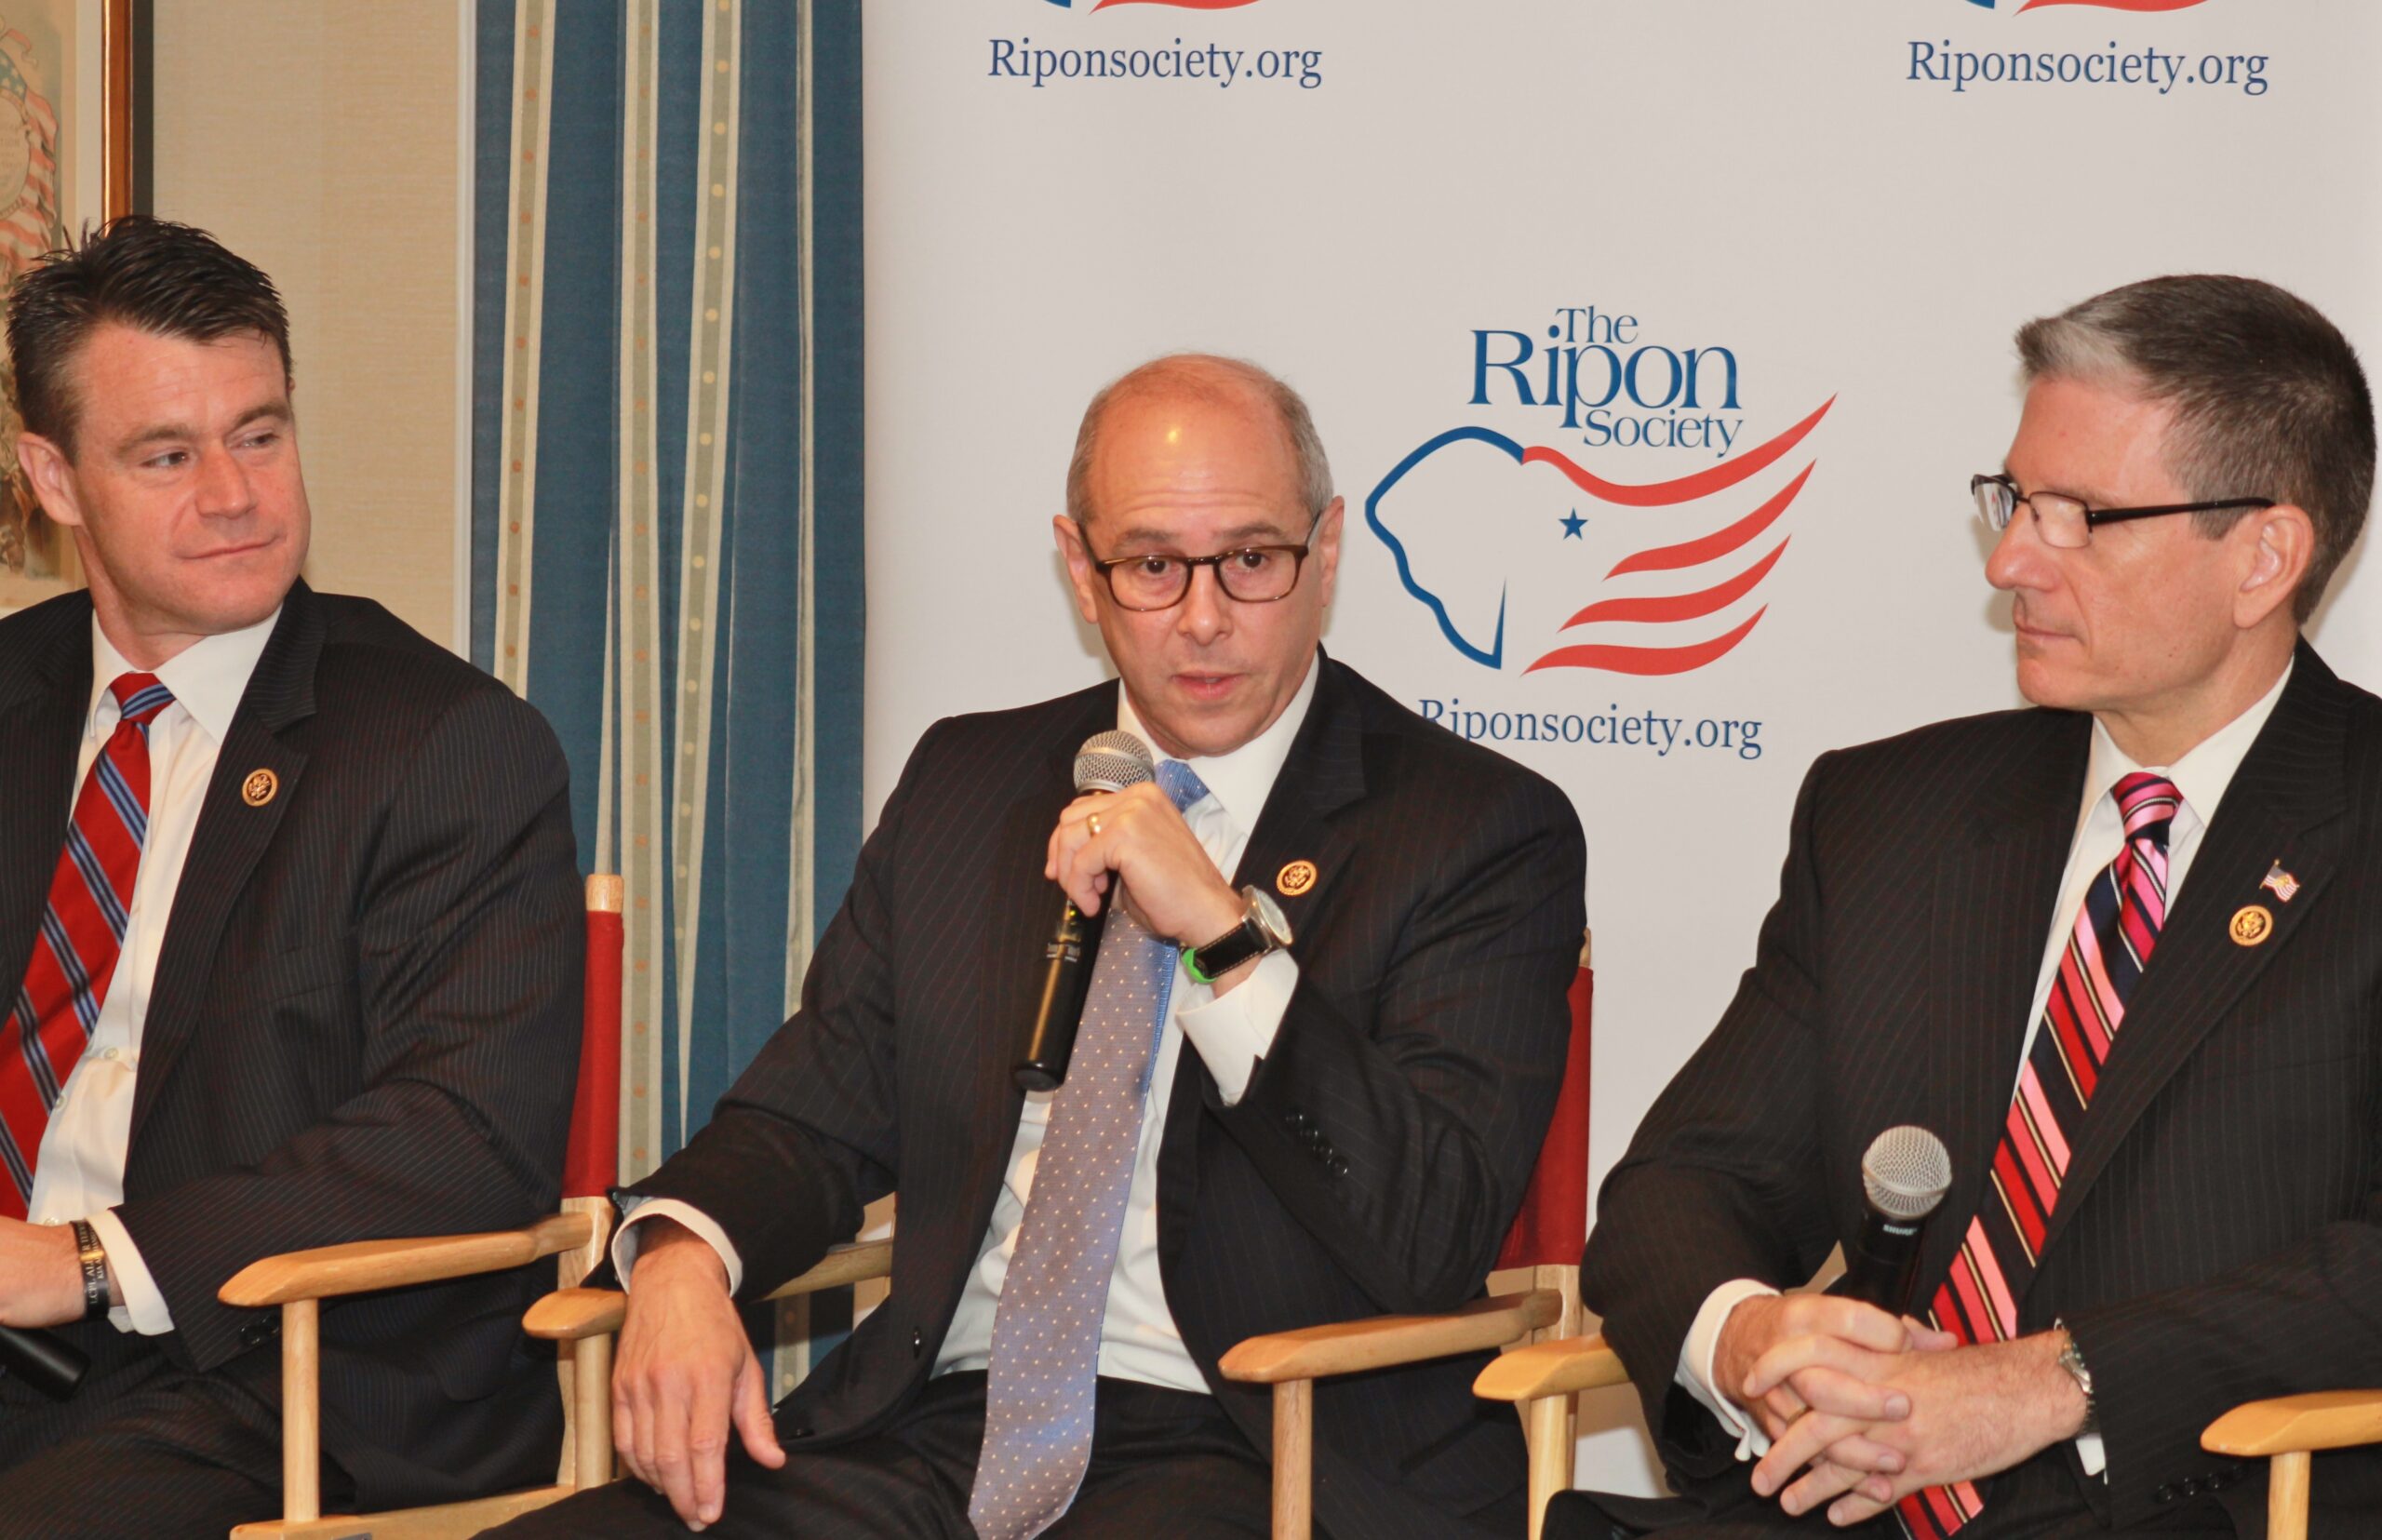 Young, Boustany & Heck Point to Economic Growth and National Security as Key Issues in Fall Campaign